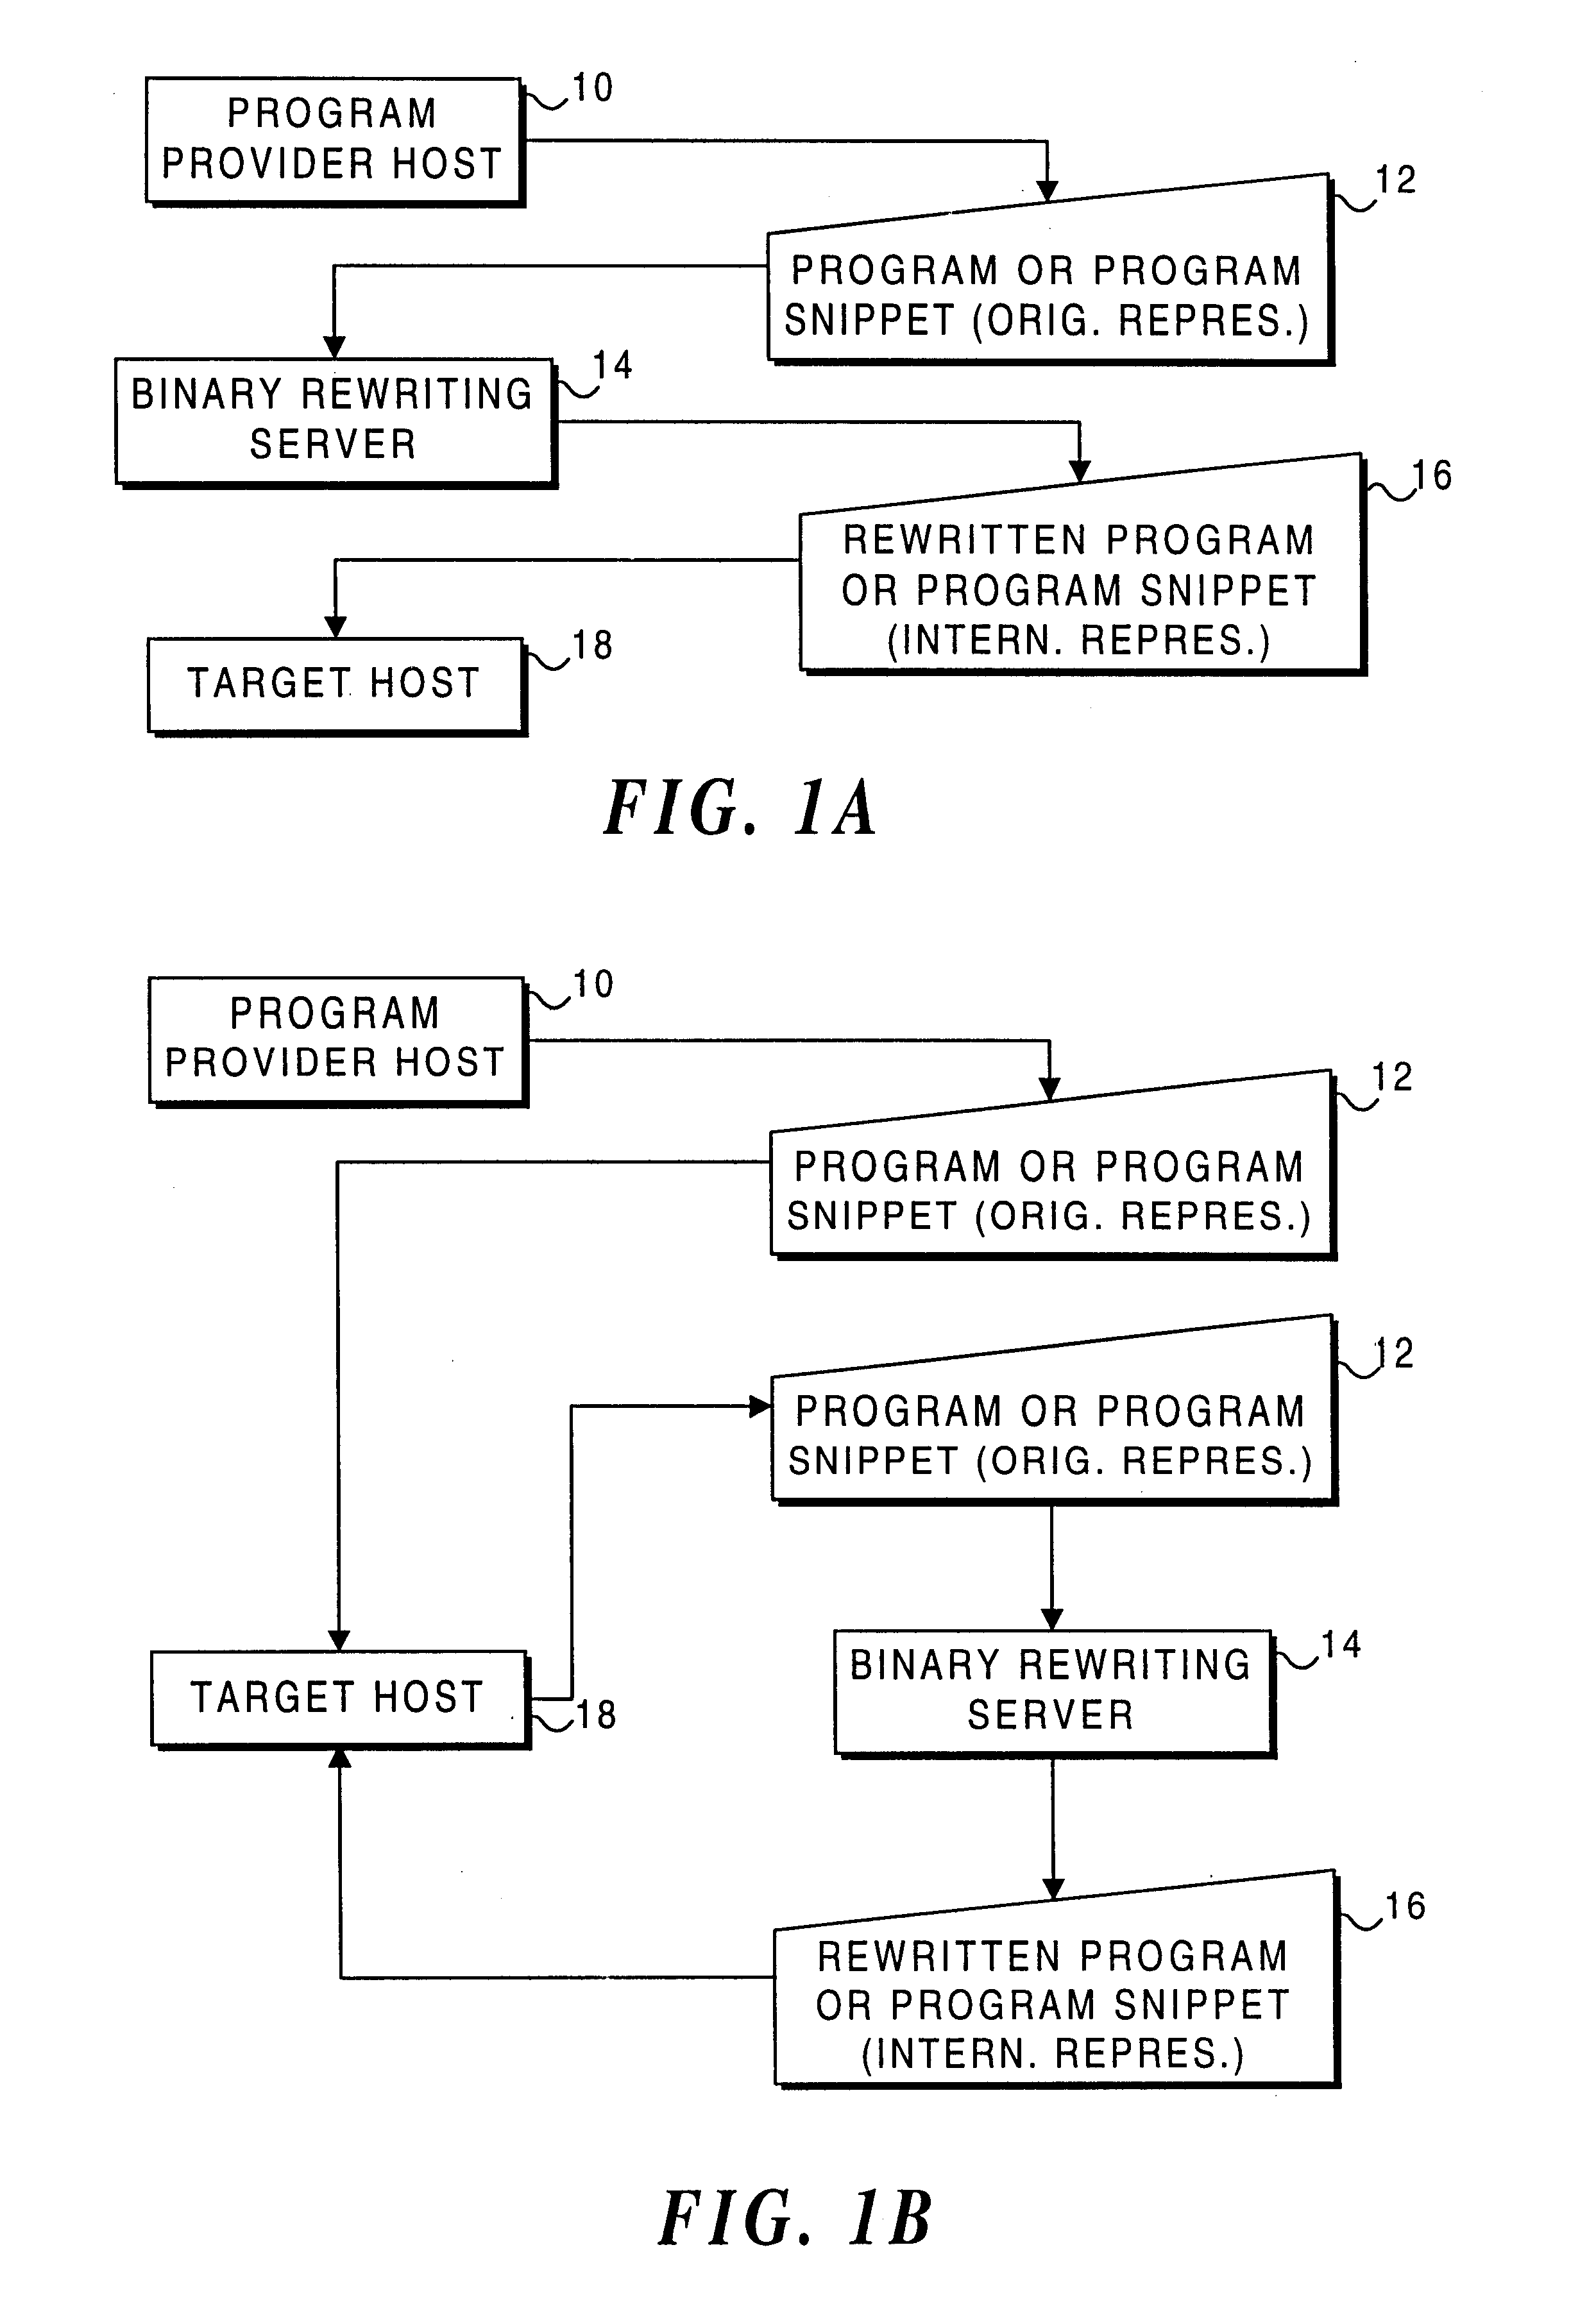 Process for rewriting executable content on a network server or desktop machine in order to enforce site specific properties